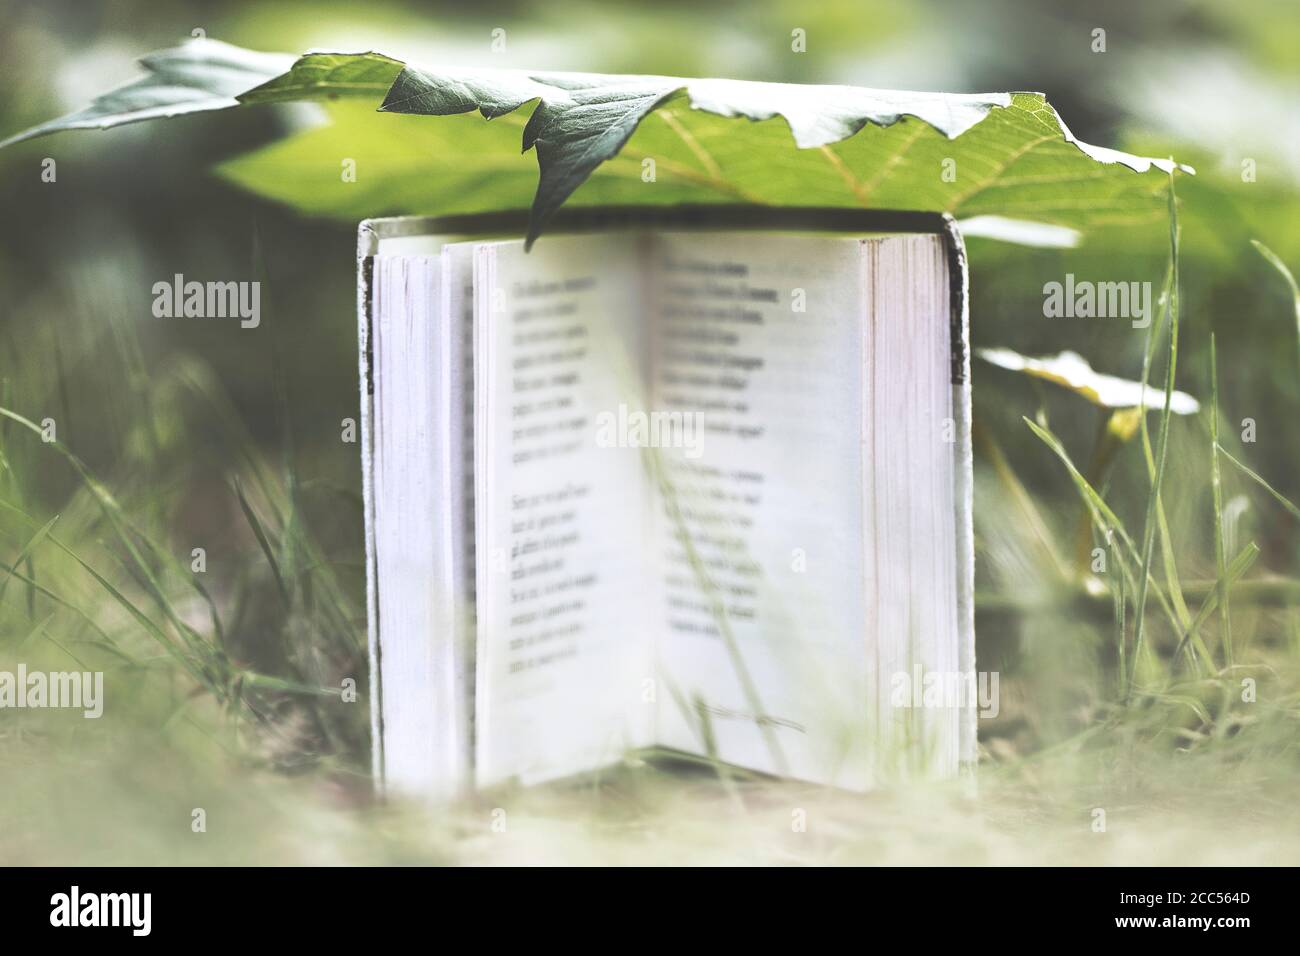 surreal moment of a small book that protects itself under a large leaf from the rain Stock Photo